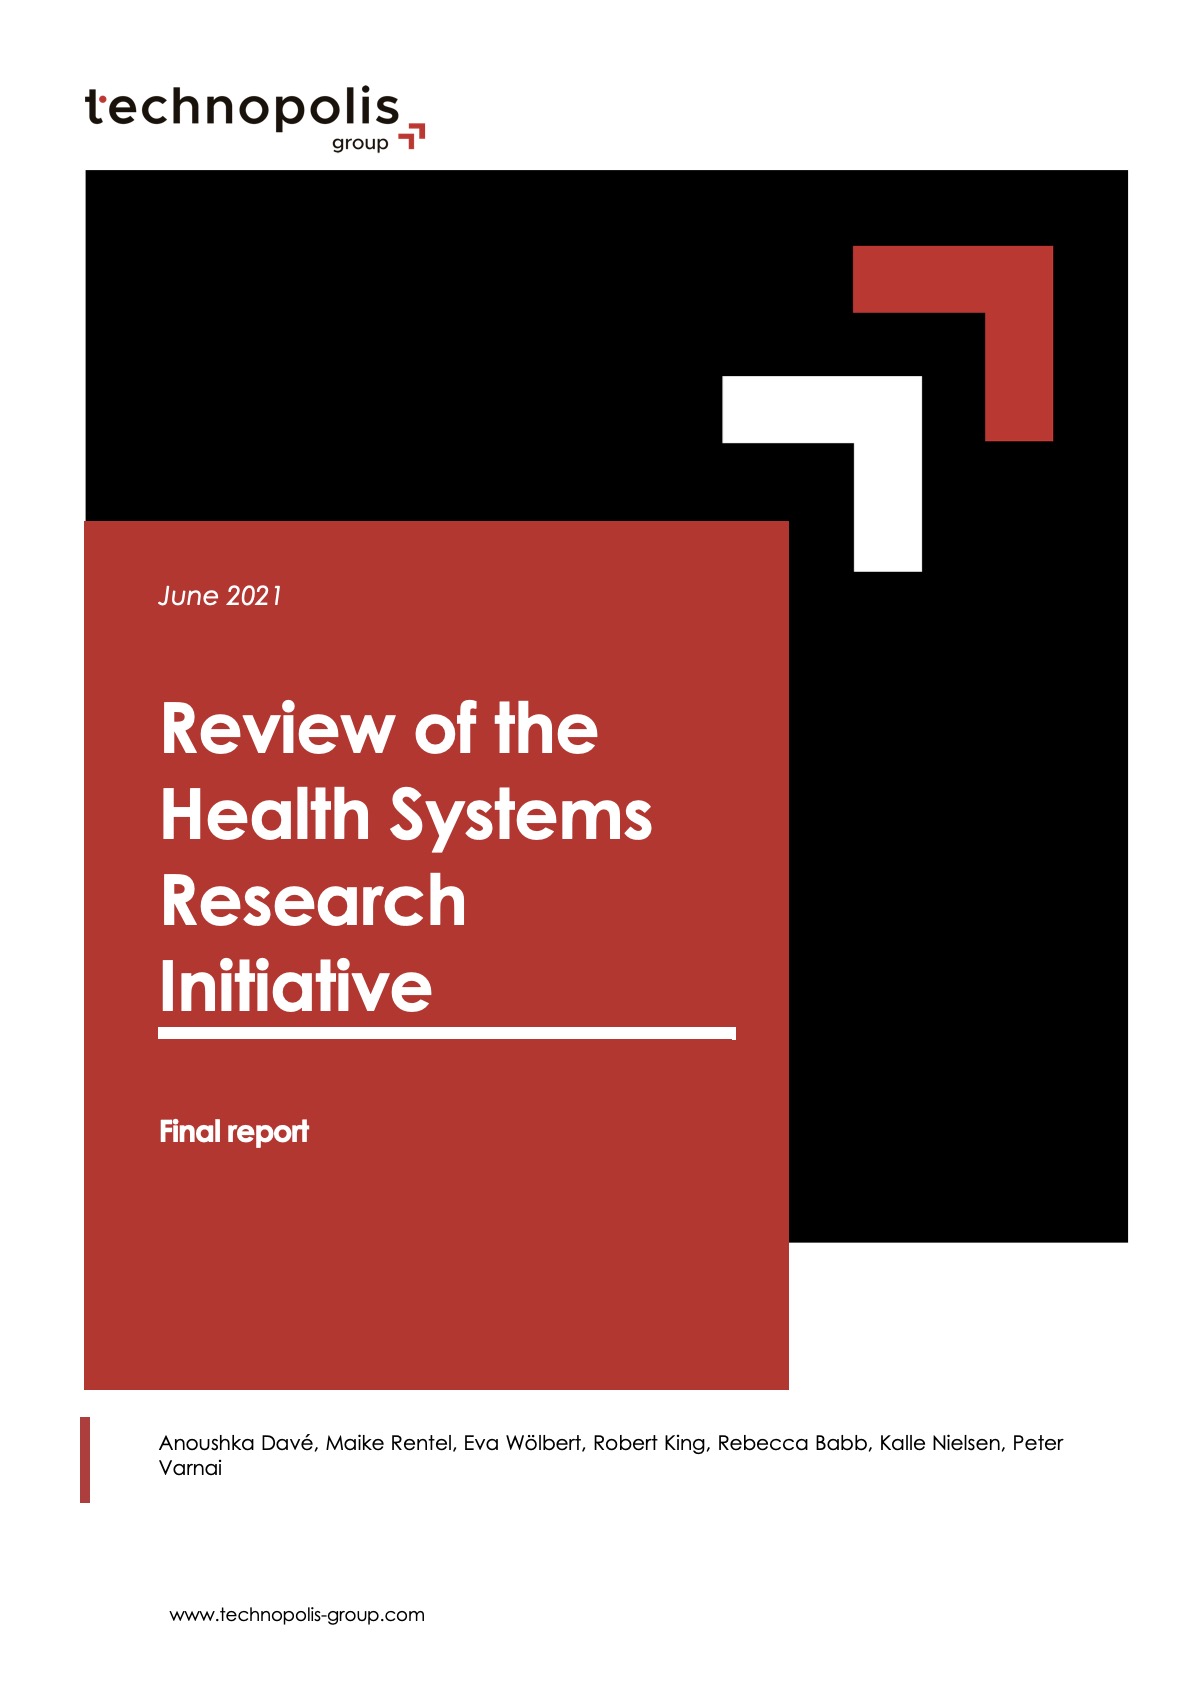 Review of the Health Systems Research Initiative